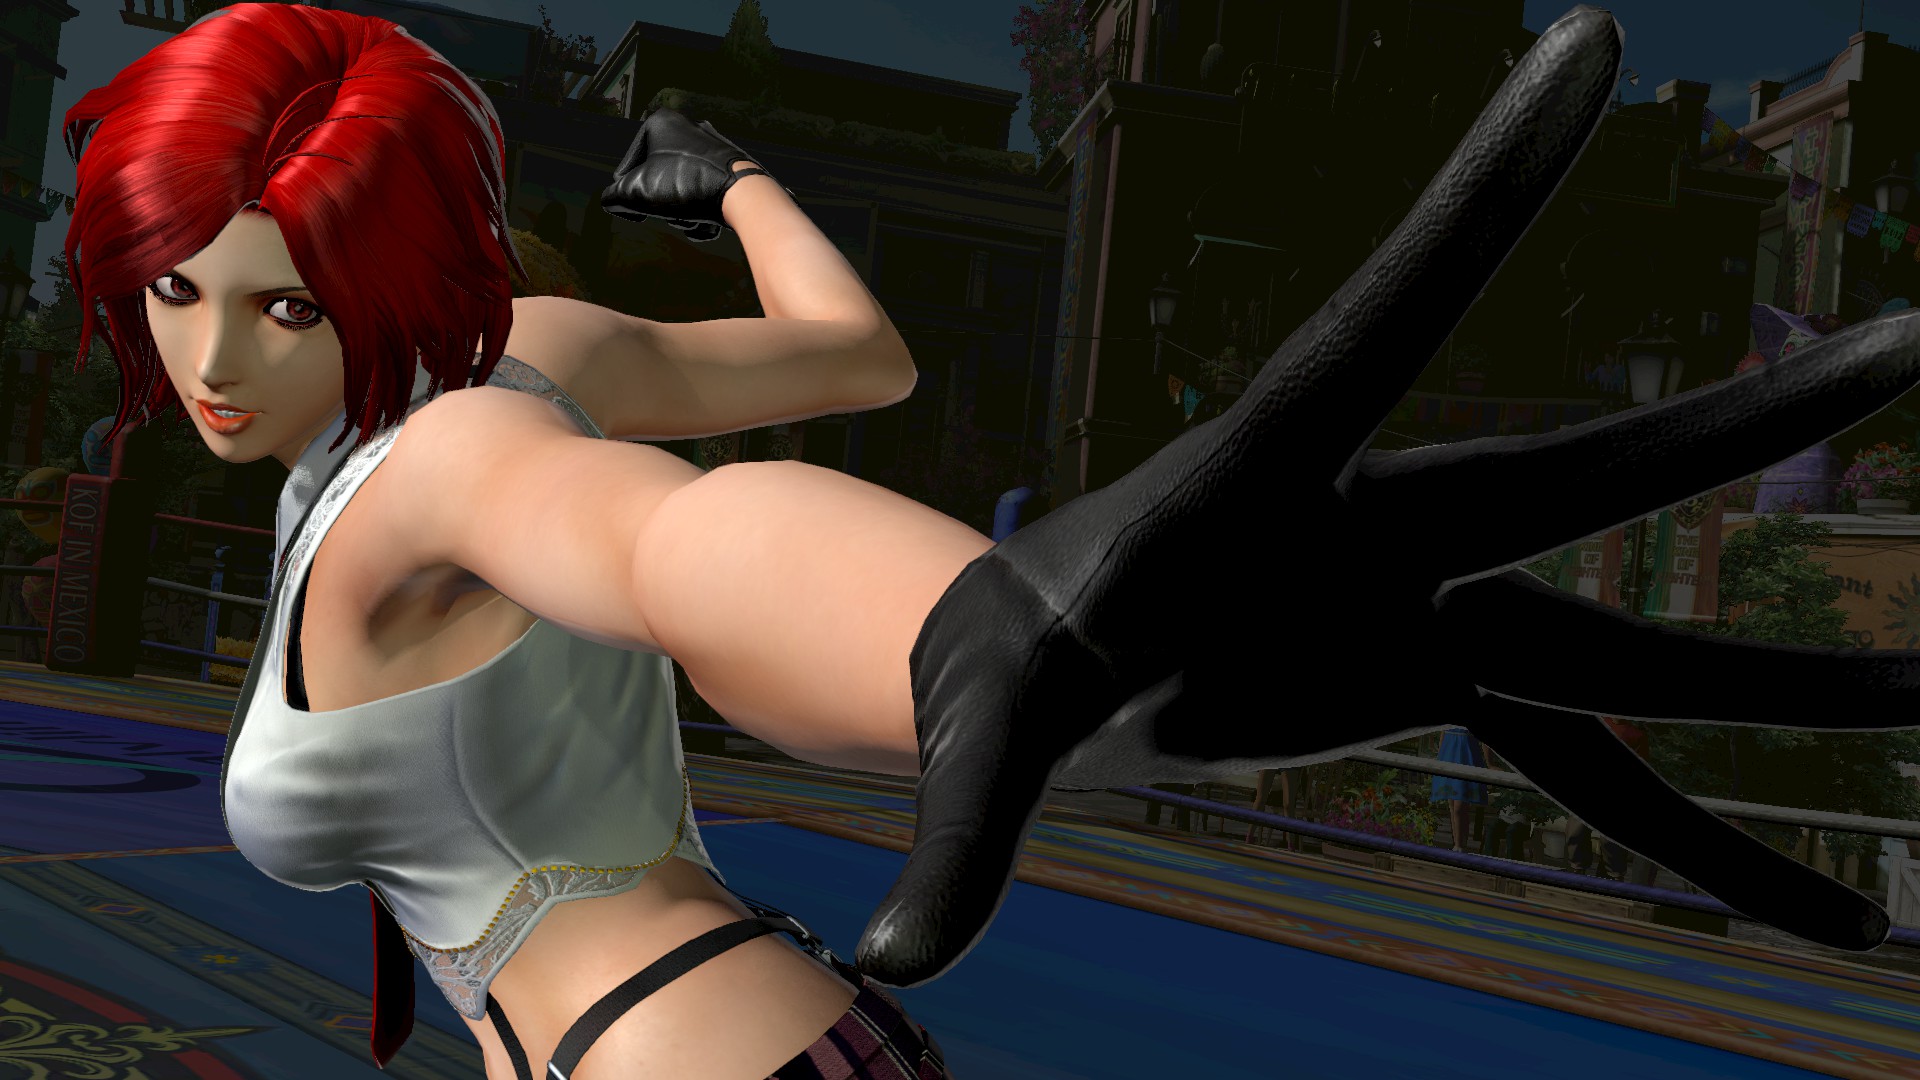 THE KING OF FIGHTERS XIV STEAM EDITION UPGRADE PACK #1 Featured Screenshot #1